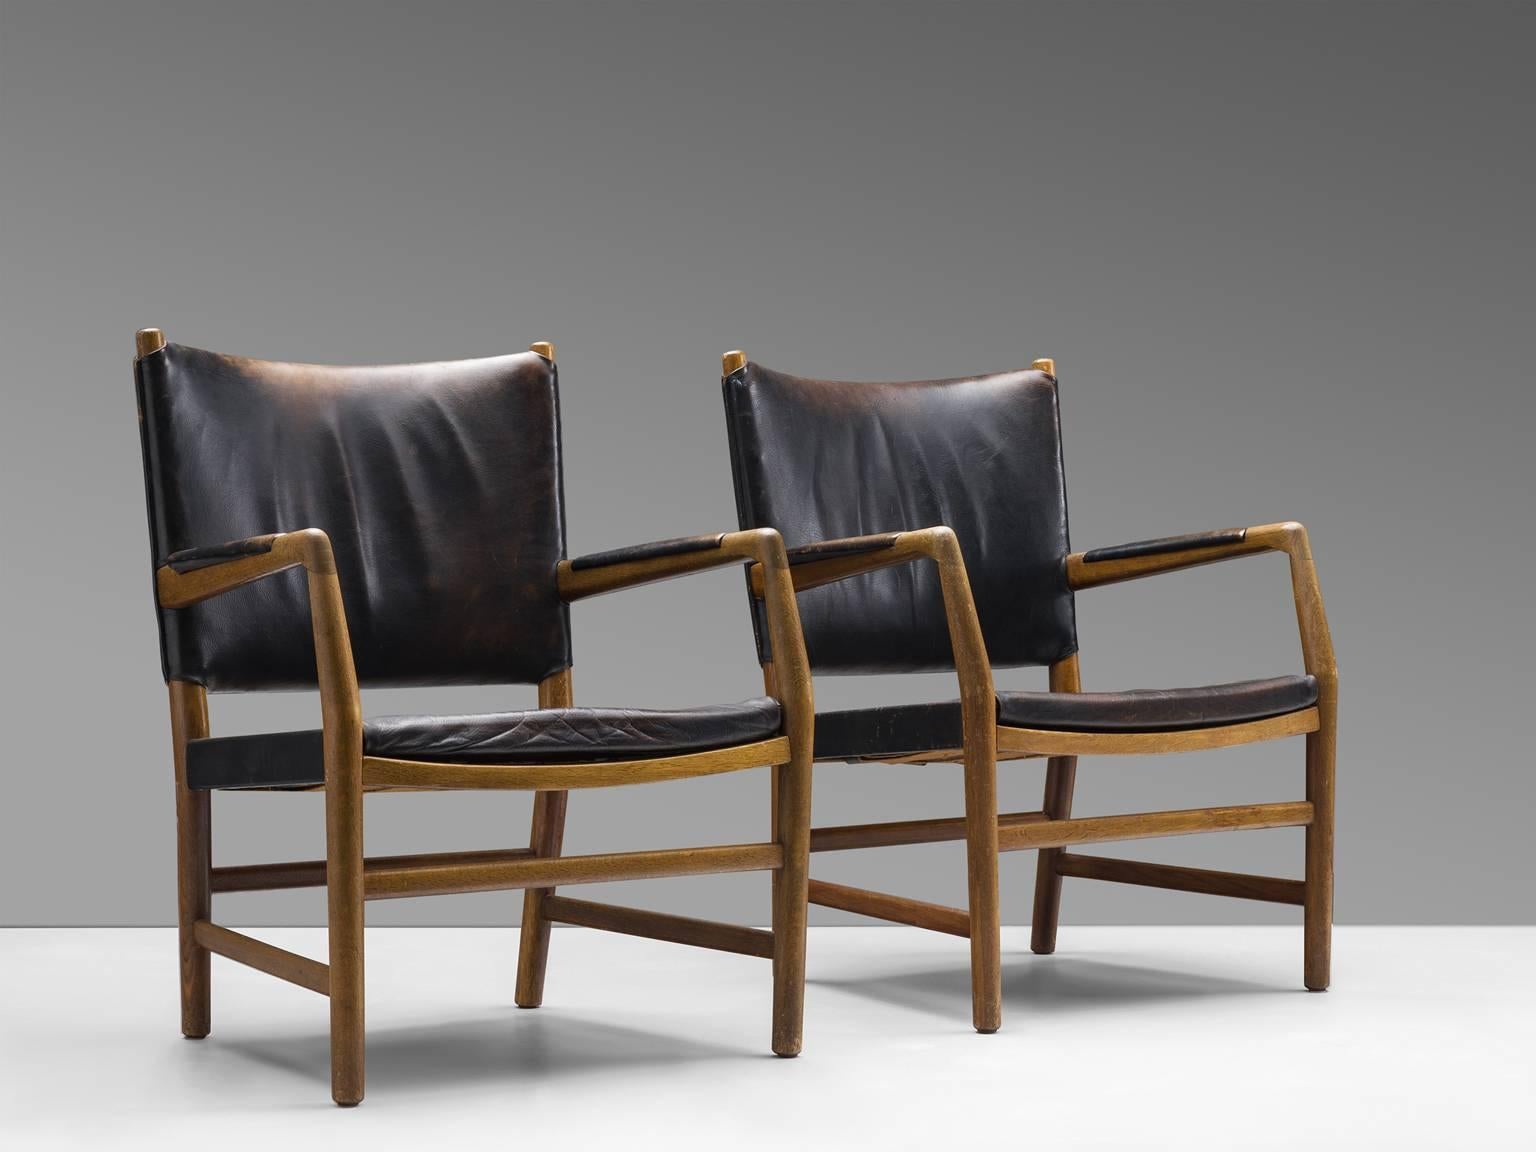 Armchairs 'Aarhus city hall chair', in oak and black leather, by Hans J. Wegner for Plan Møbler, Denmark, 1942.

This stately armchair was designed for the Aarhus city hall in Denmark. The chair is made of oak. Varnished wood with an admirable